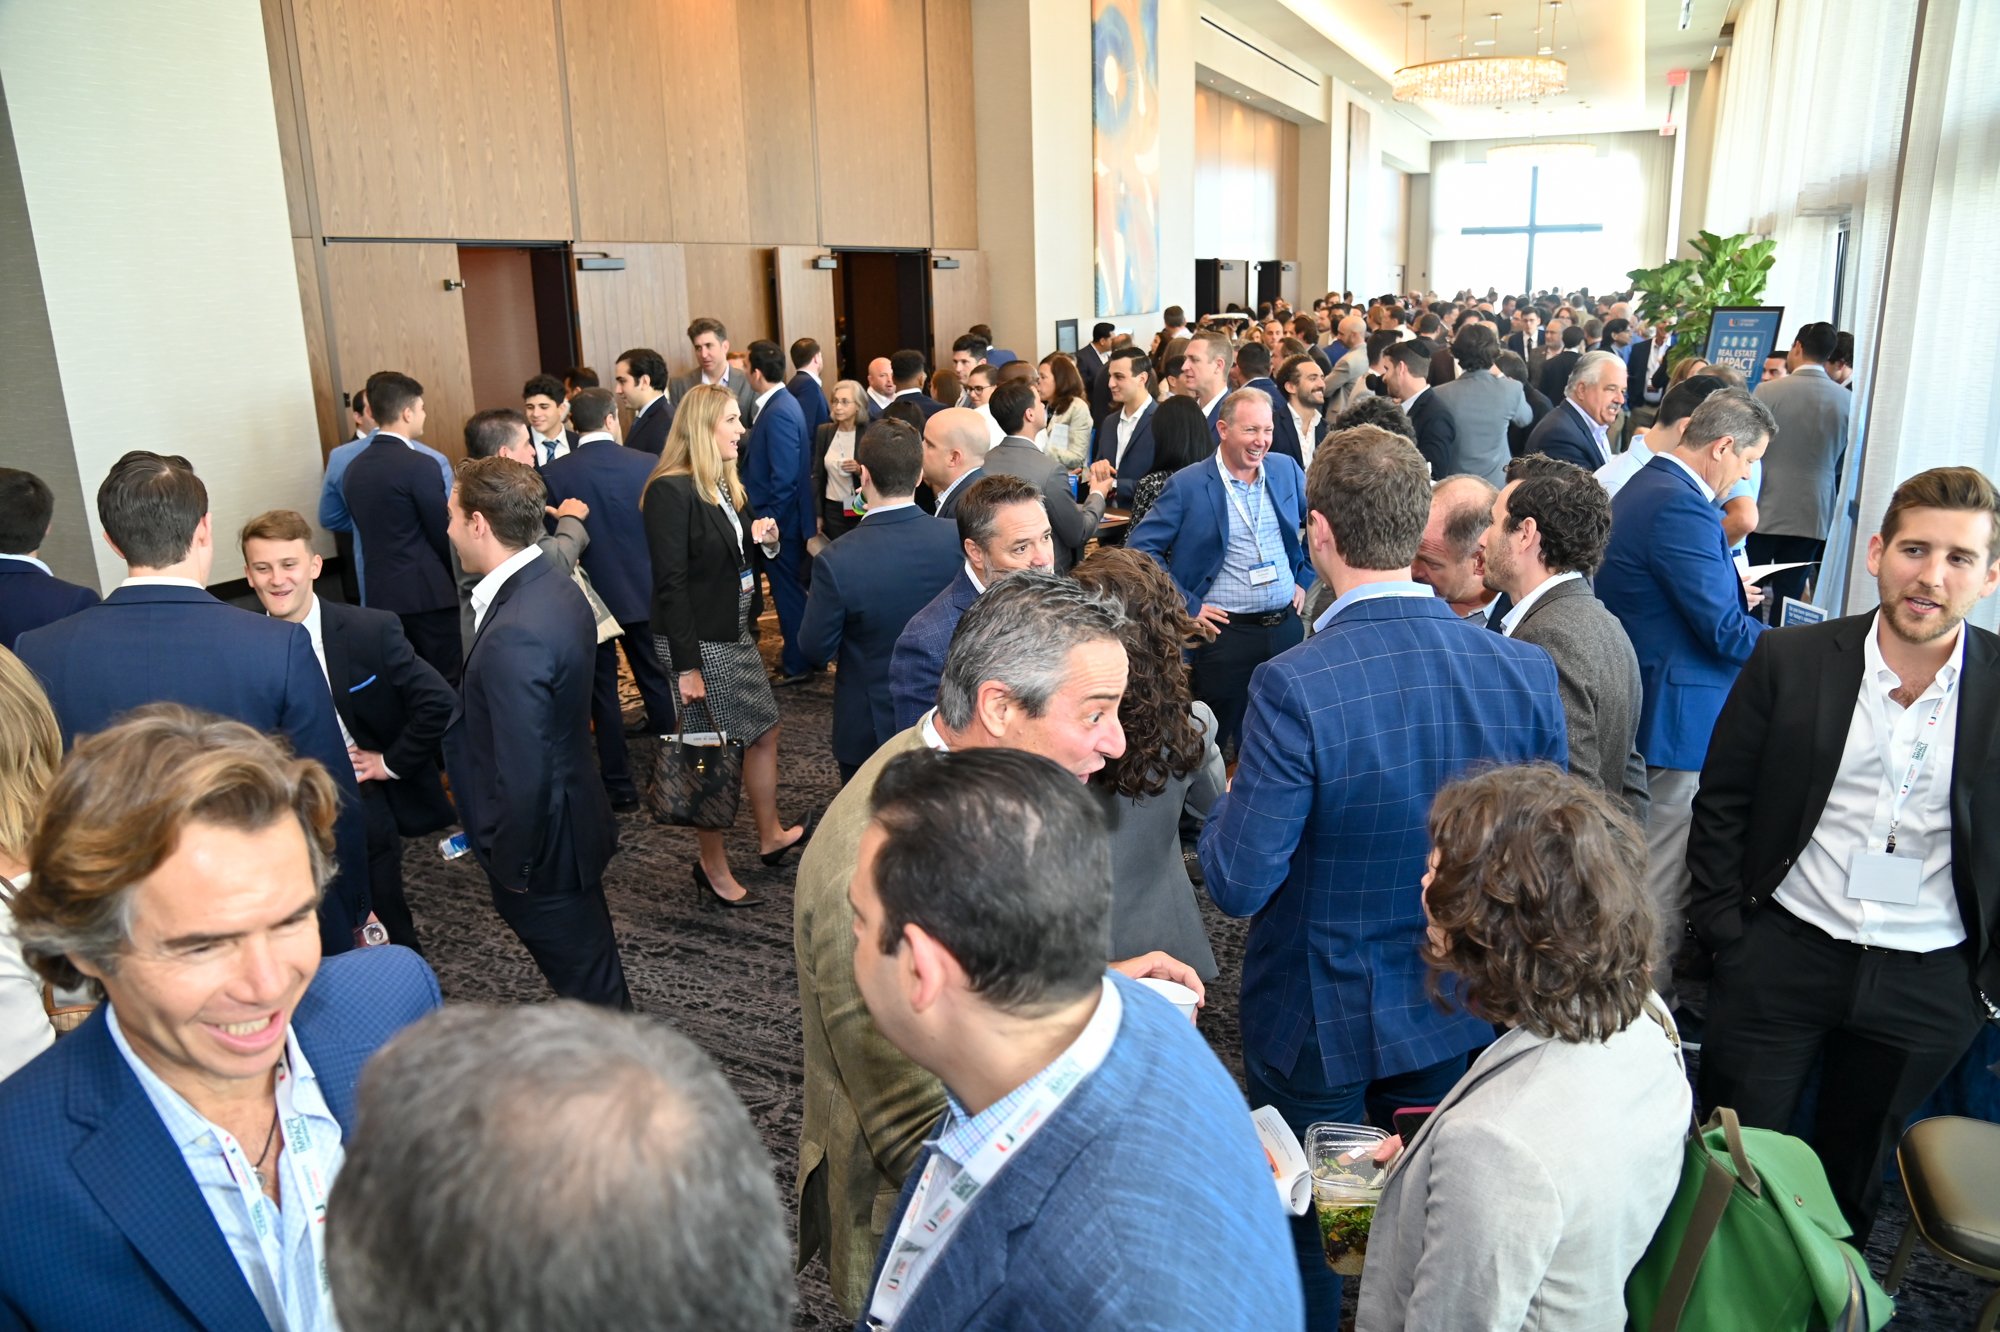 University of Miami Real Estate Impact Conference 2023 The Largest Edition Yet As Real Estate Leaders Discuss The State of Miami Real Estate 612.jpg